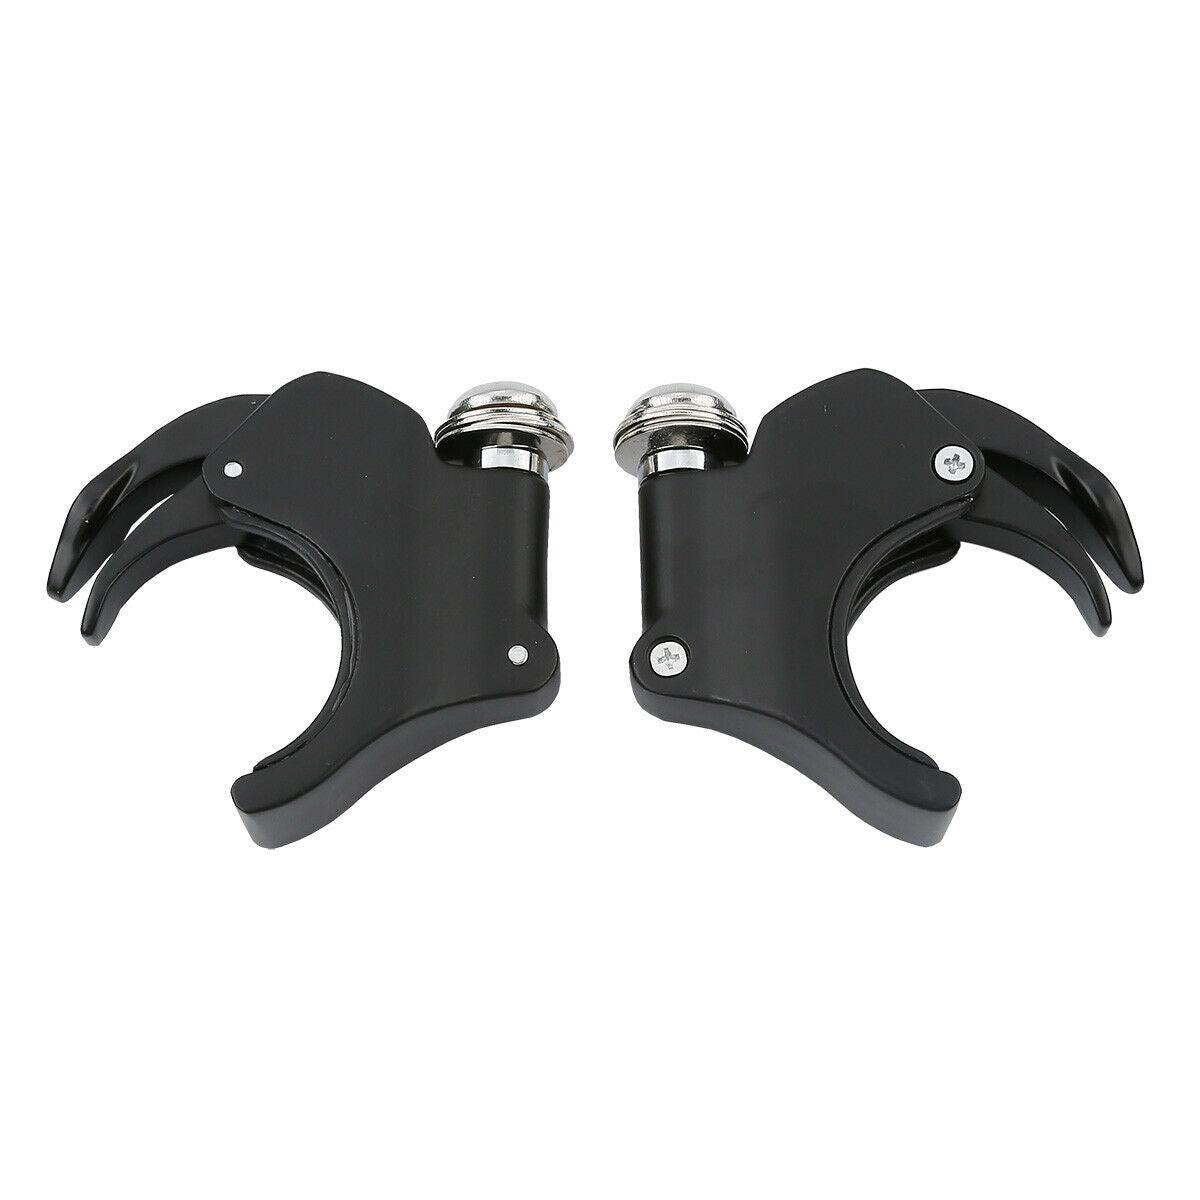 4PCS 49mm Windscreen Windshield Clamps Black For Harley Dyna models 2006-later - Moto Life Products